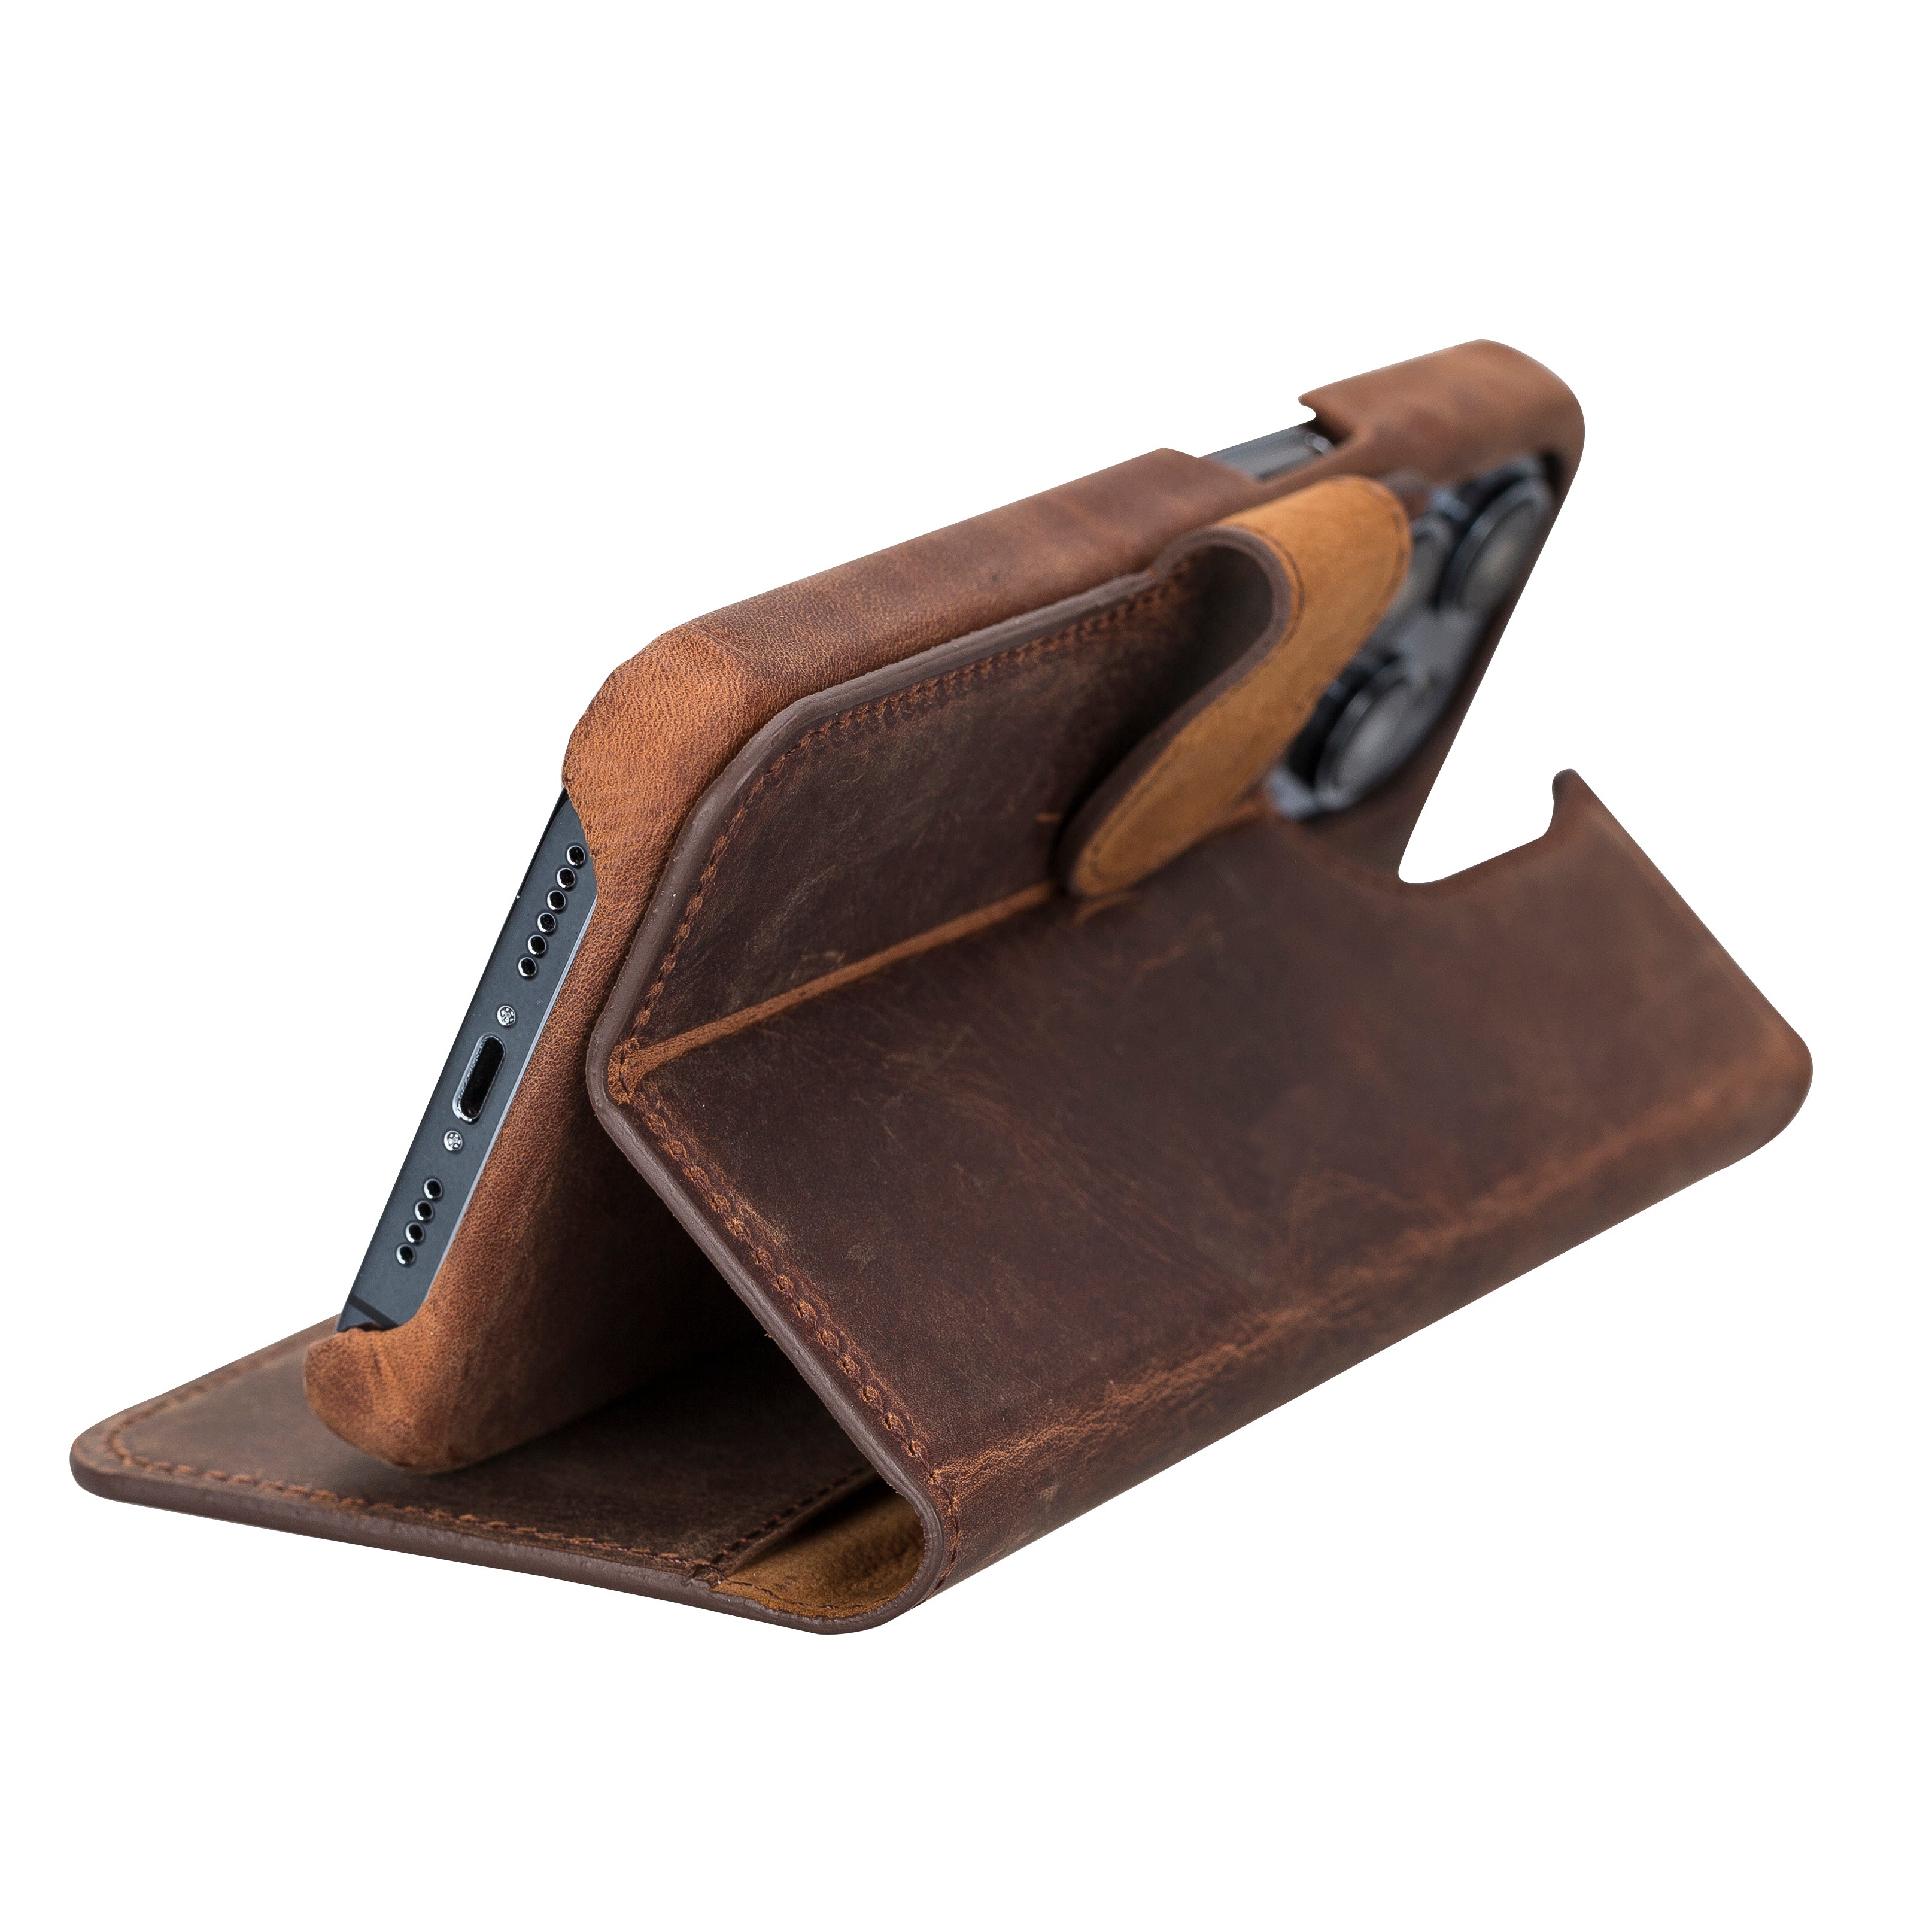 Geometric Goods iPhone 15 Series Leather Folio Case Wallet with MagSafe - The Minimalist 3.0 Brown / iPhone 15 Plus